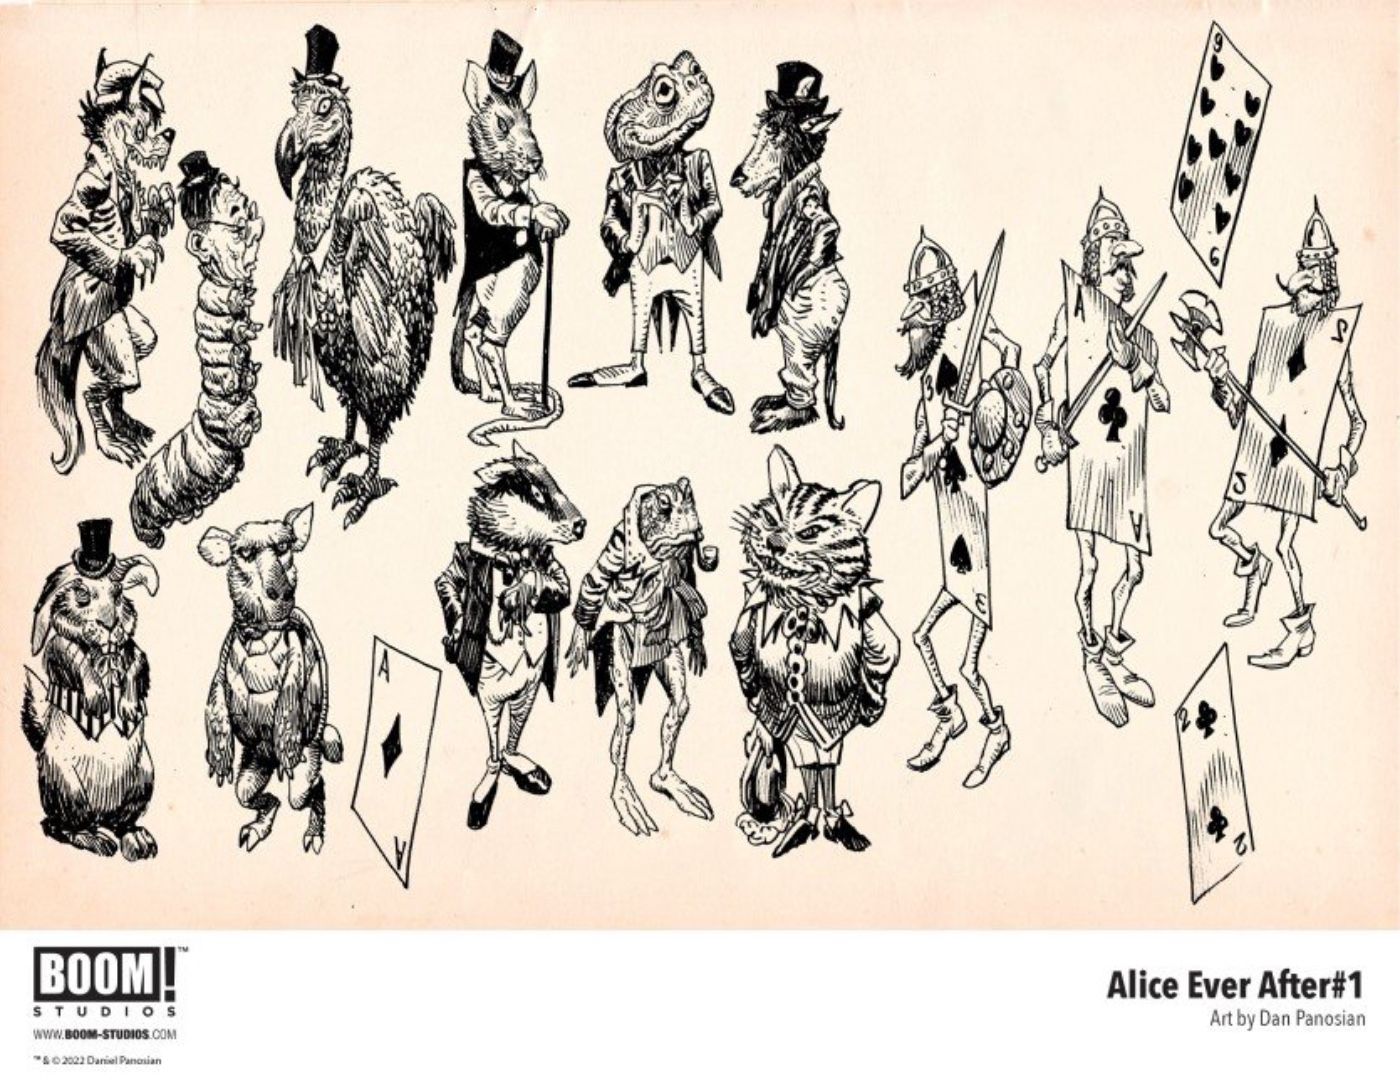 Alice Ever After character sketches